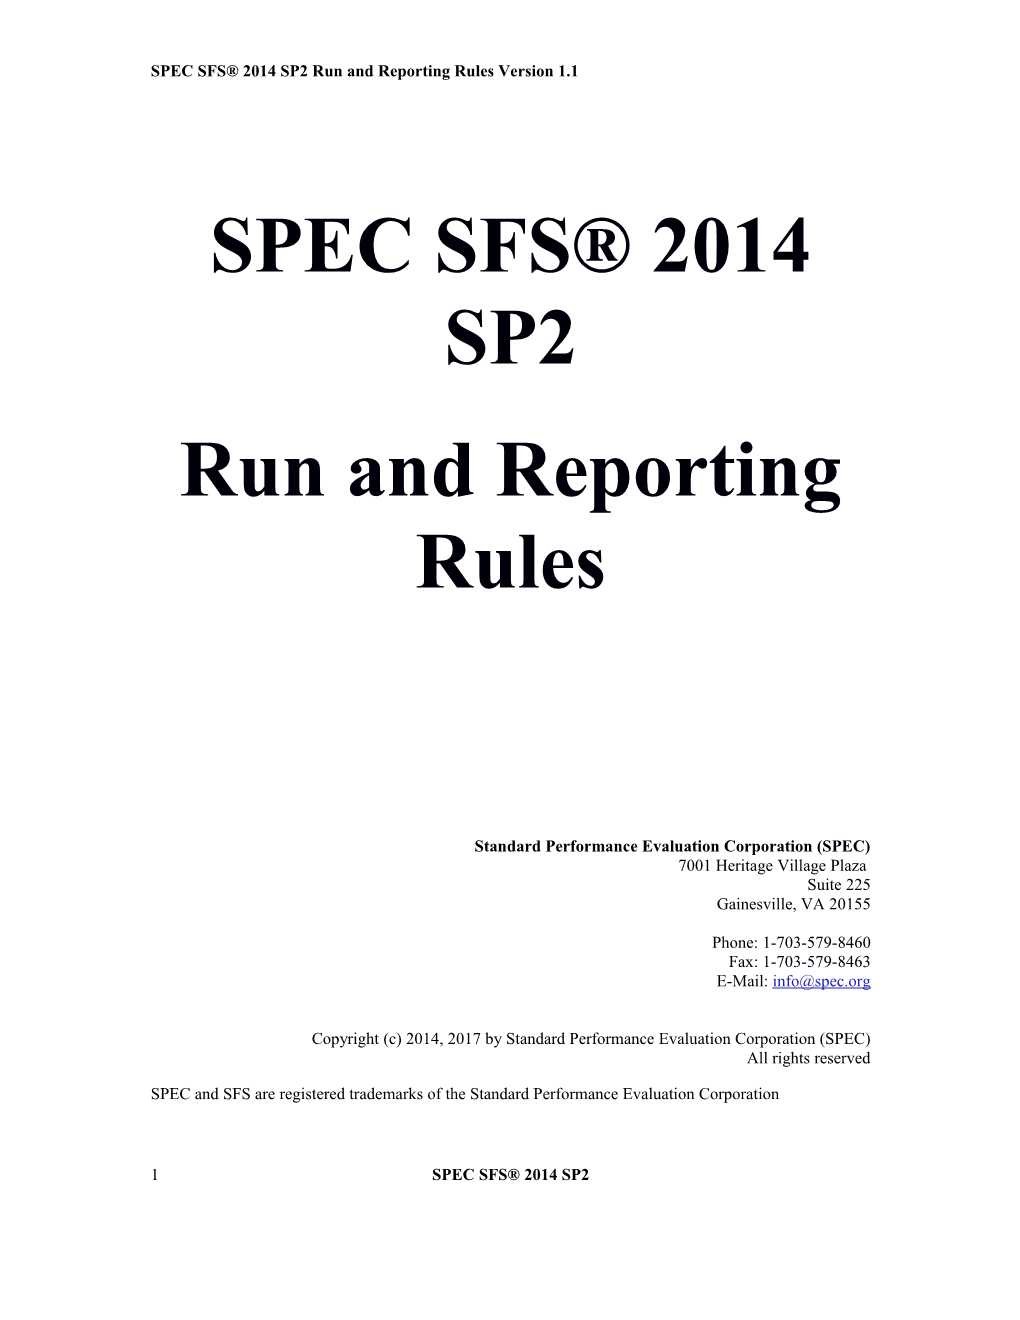 SPEC SFS 2014 SP2 Run and Reporting Rules